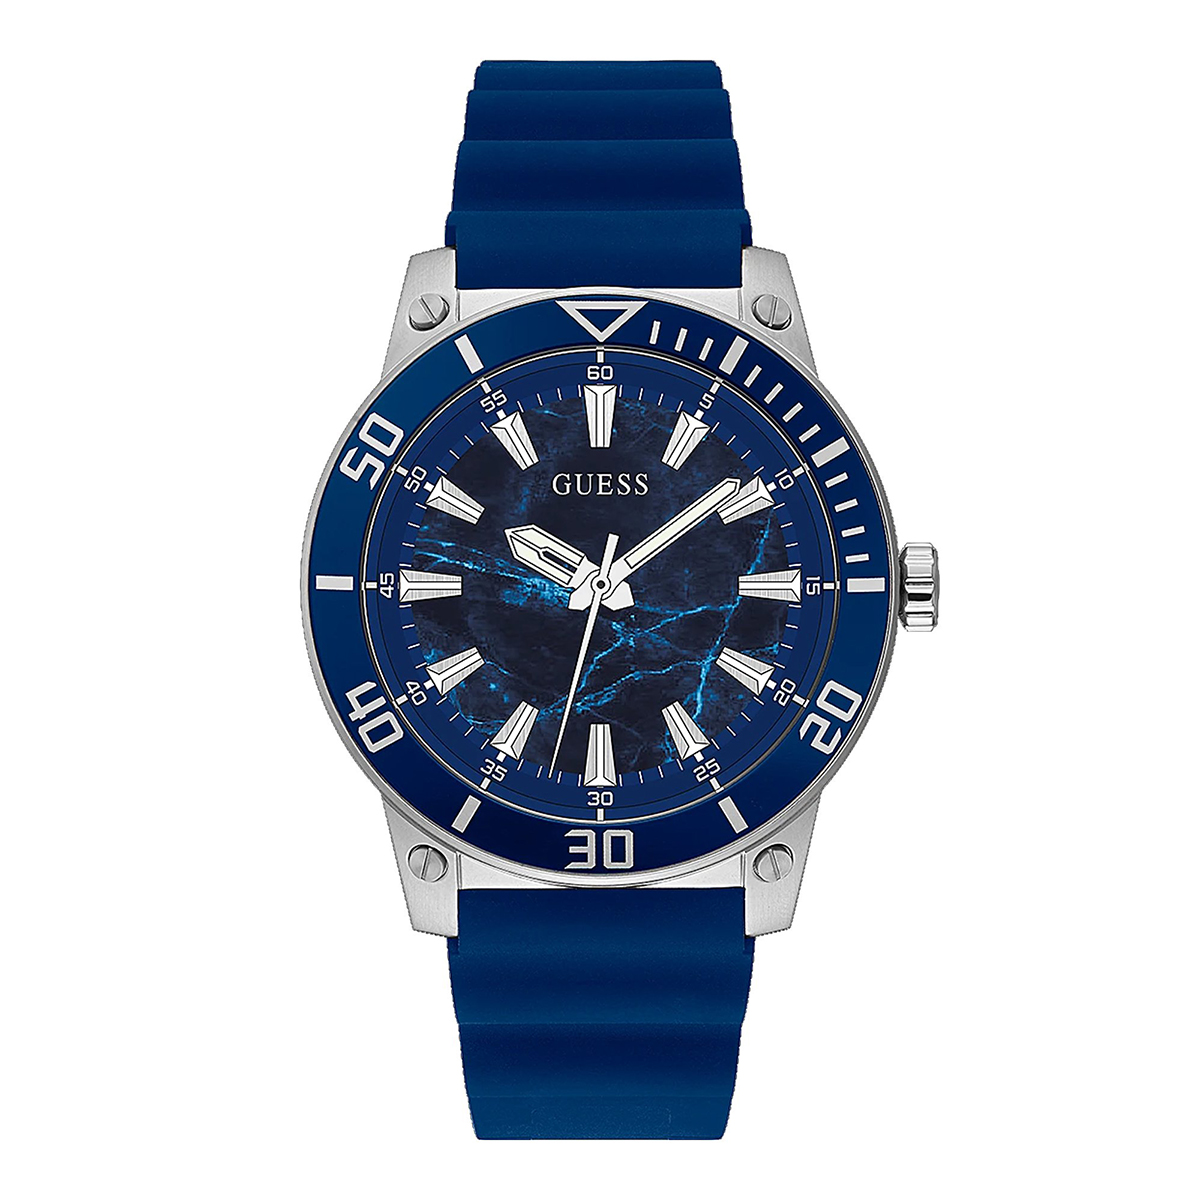 MONTRE GUESS ACTIVE LIFE HOMME SILICONE